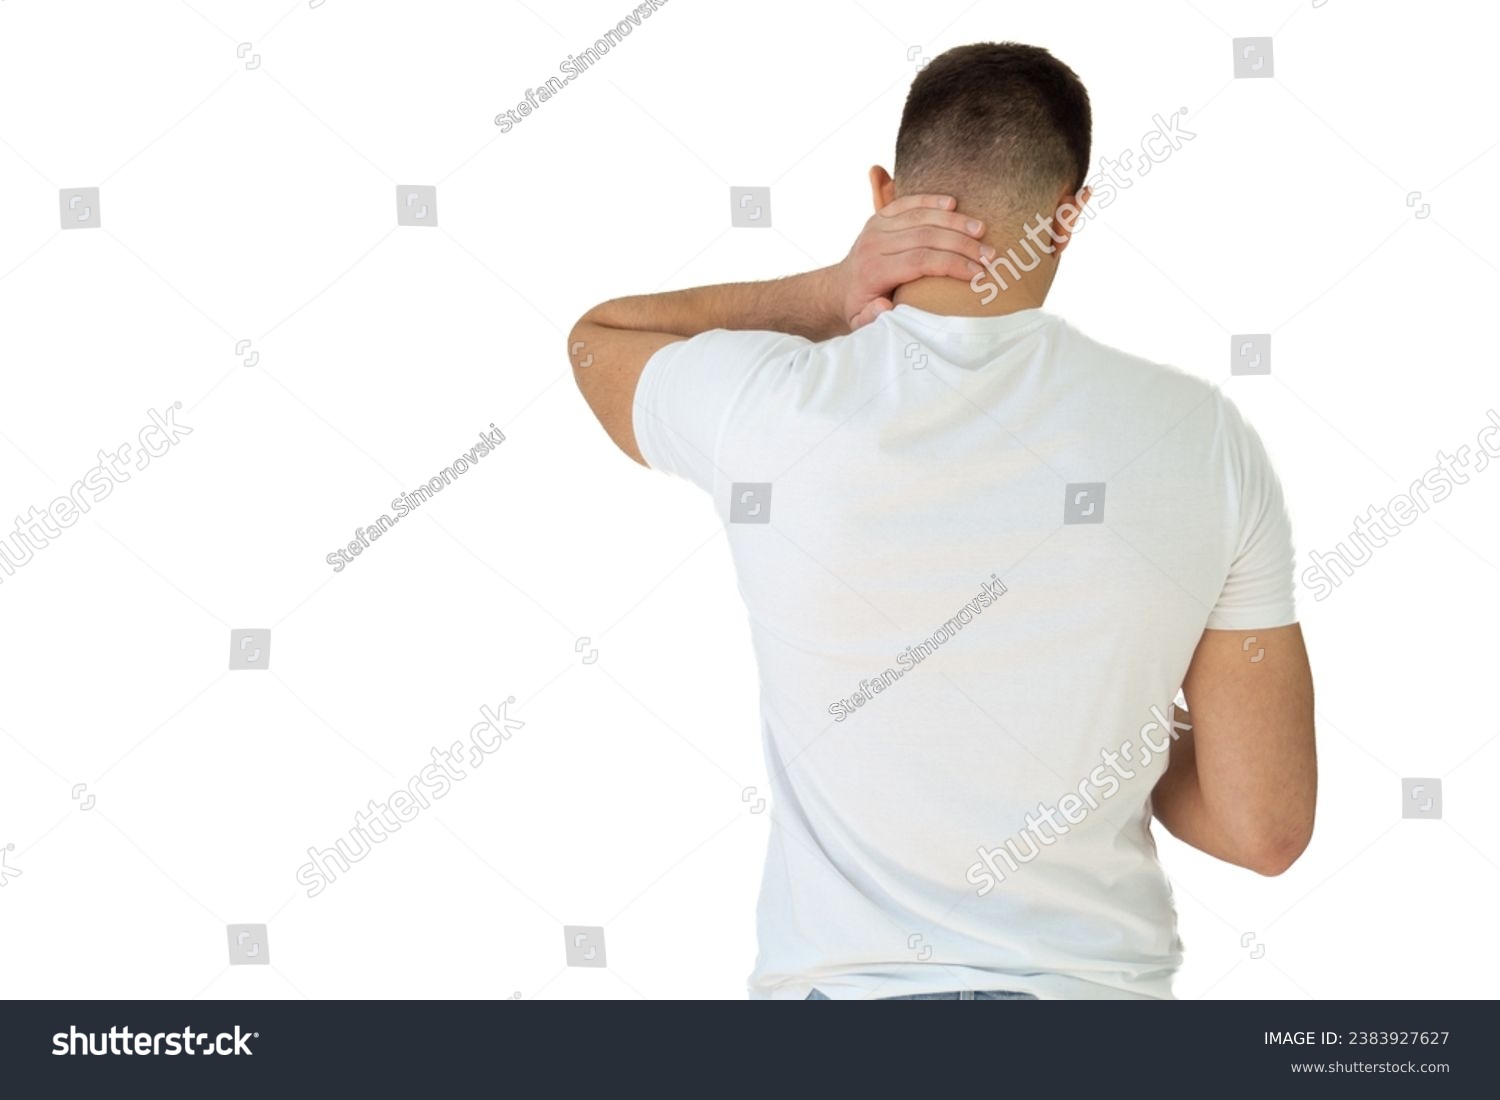 Rear view of a handsome young man in white shirt holding his back and neck in pain isolated on white background, man giving himself a massage on his neck, young man having a back and neck pain #2383927627